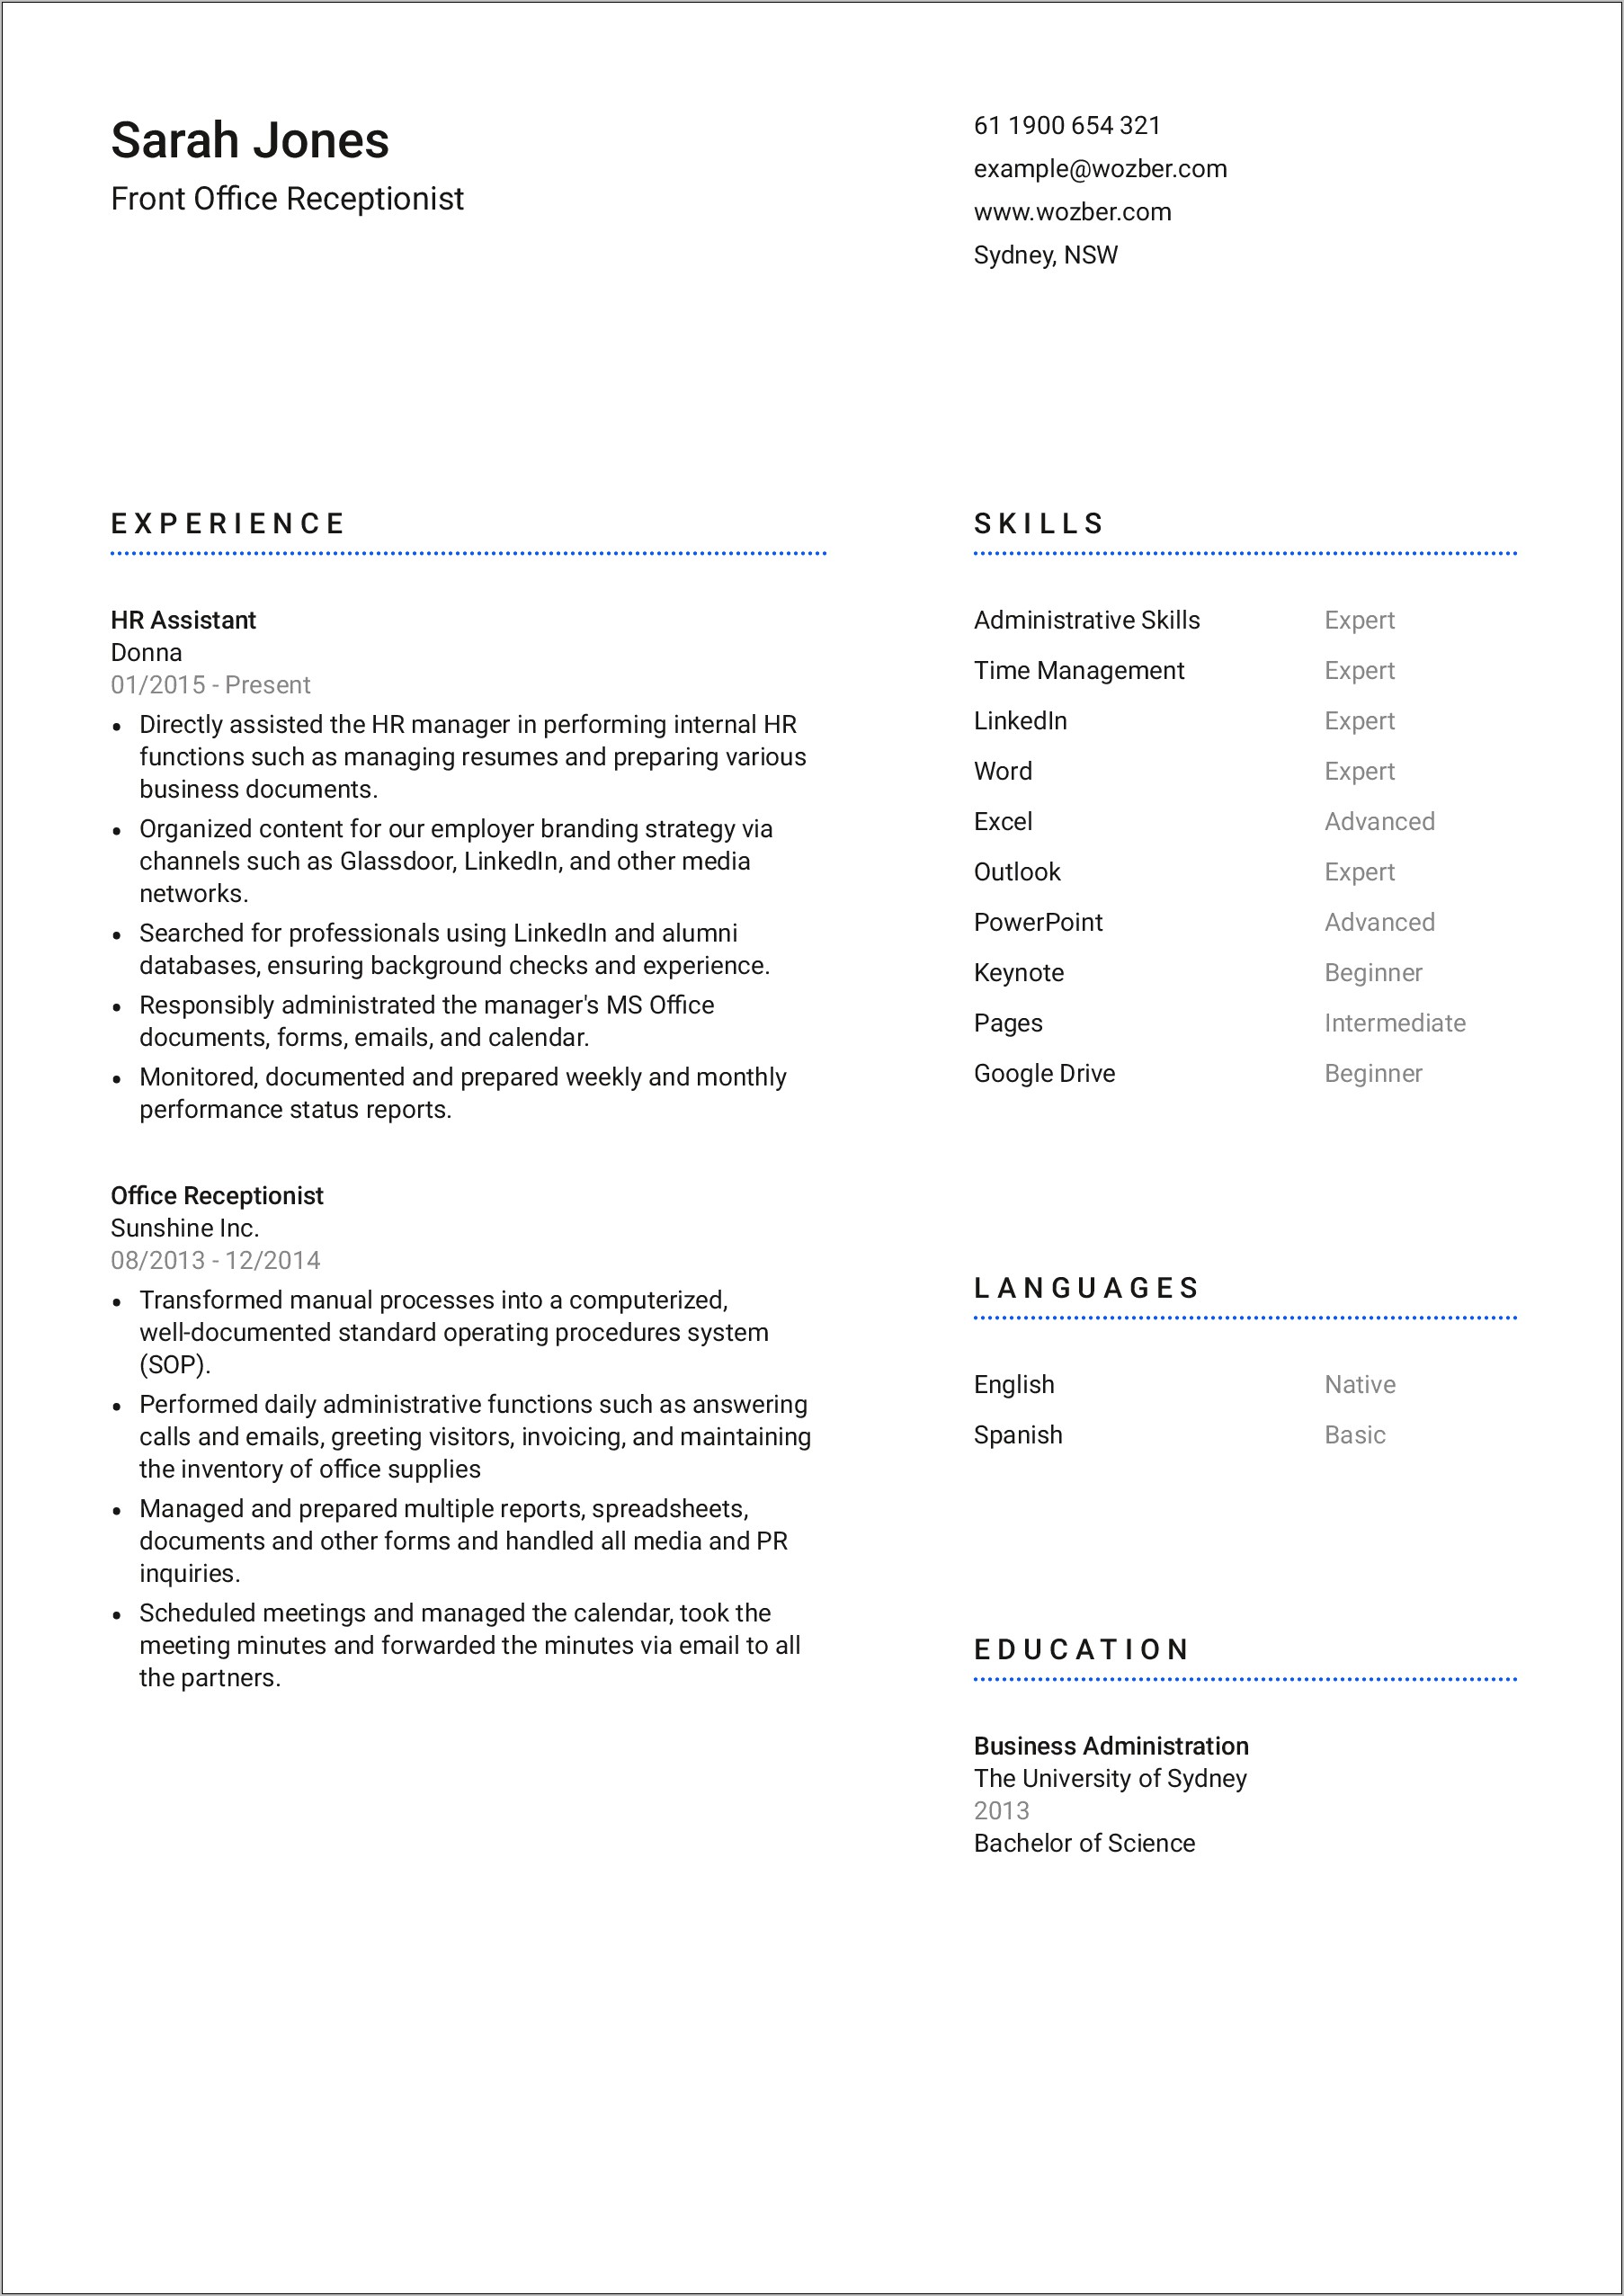 Key Achievements Examples For Resume